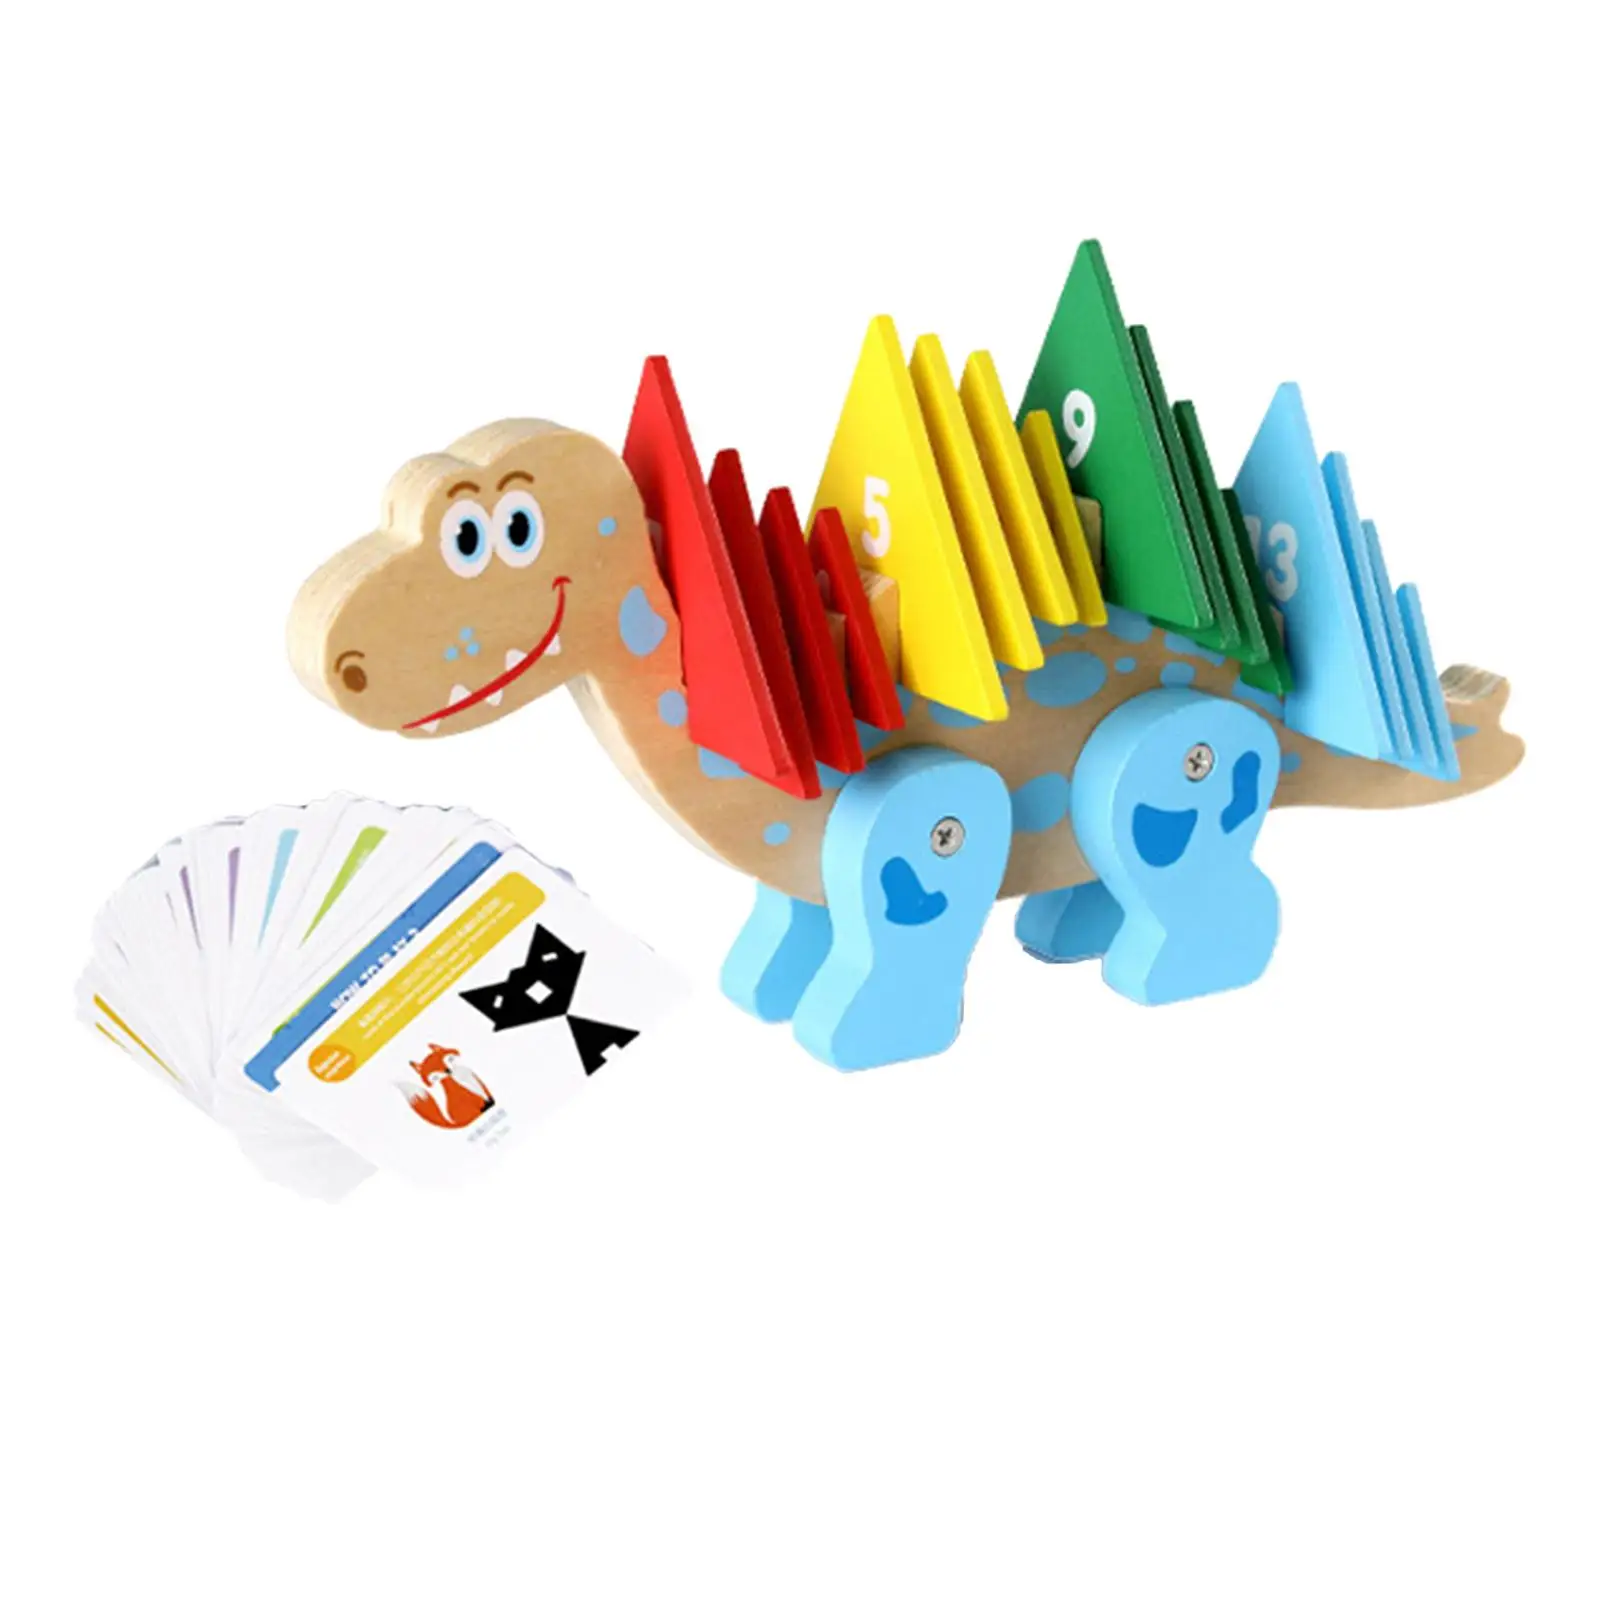 Kids Math Toy Find Developmental Toy Wooden Color Shape Recognition Dinosaur Toy Gift